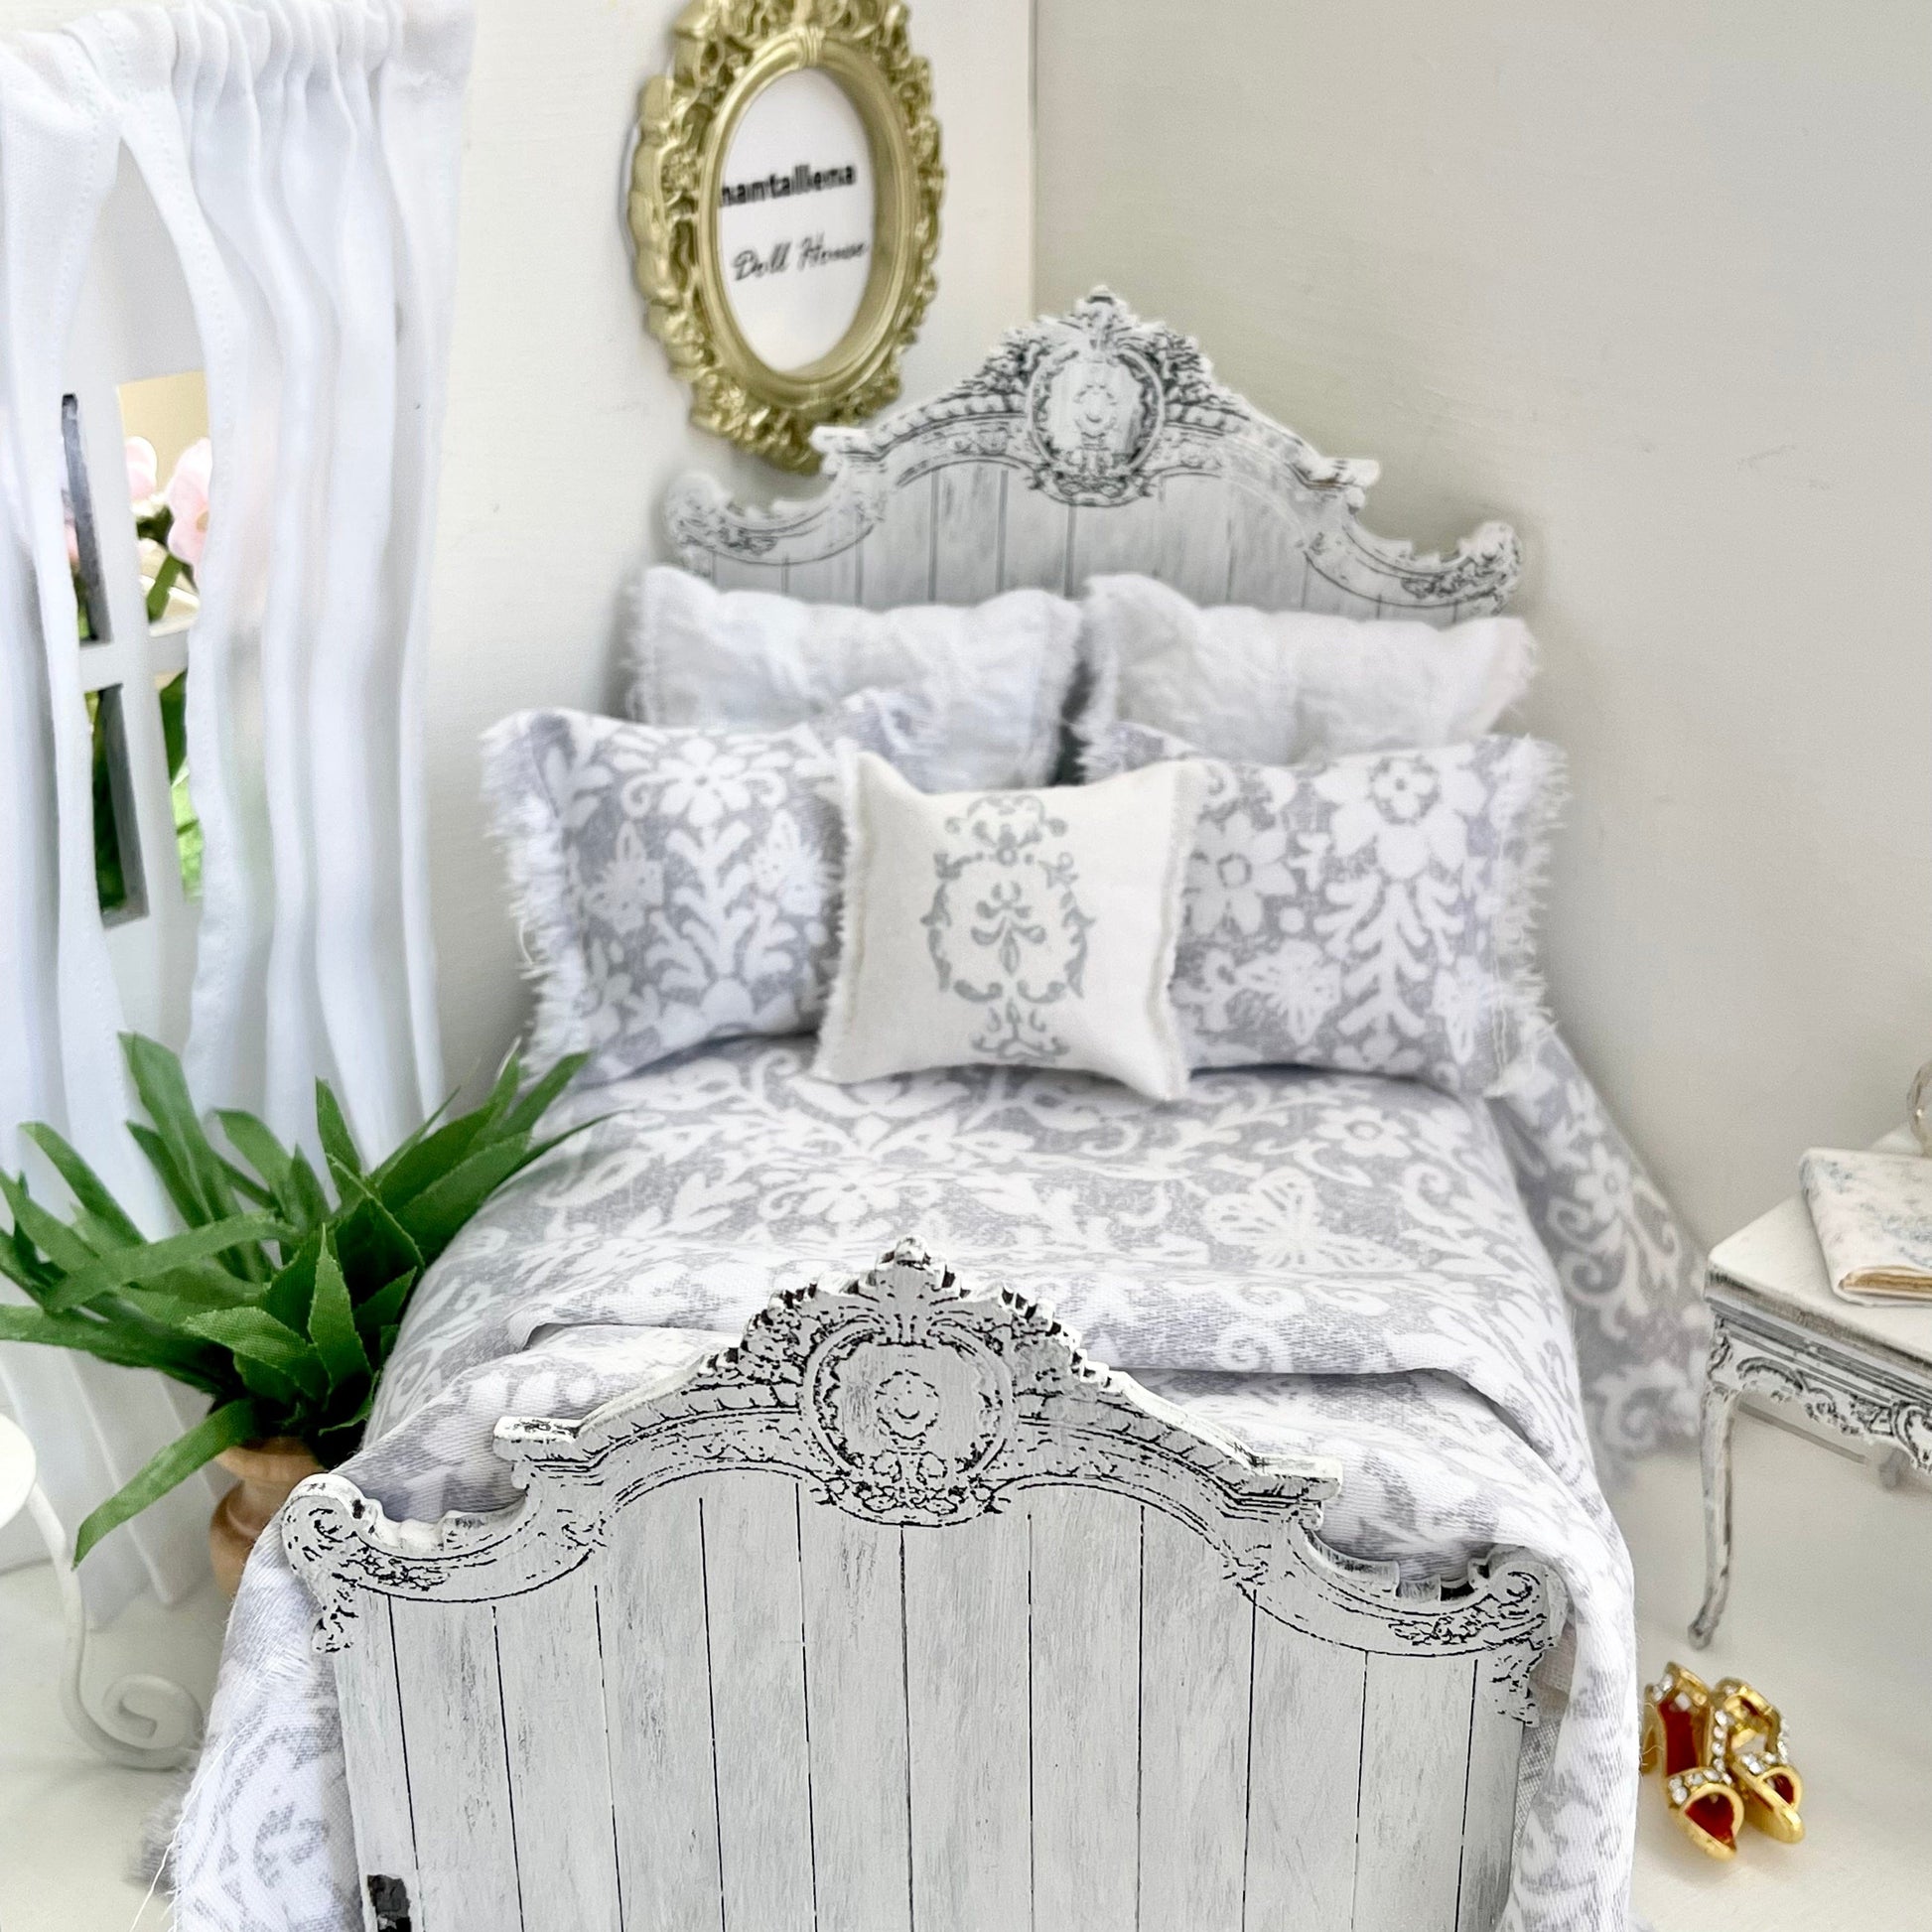 Chantallena Doll House Double Bedding Set Country Weekend | Grey Cotton Bedding Set with White Lace Trim| Blue Country Meadow